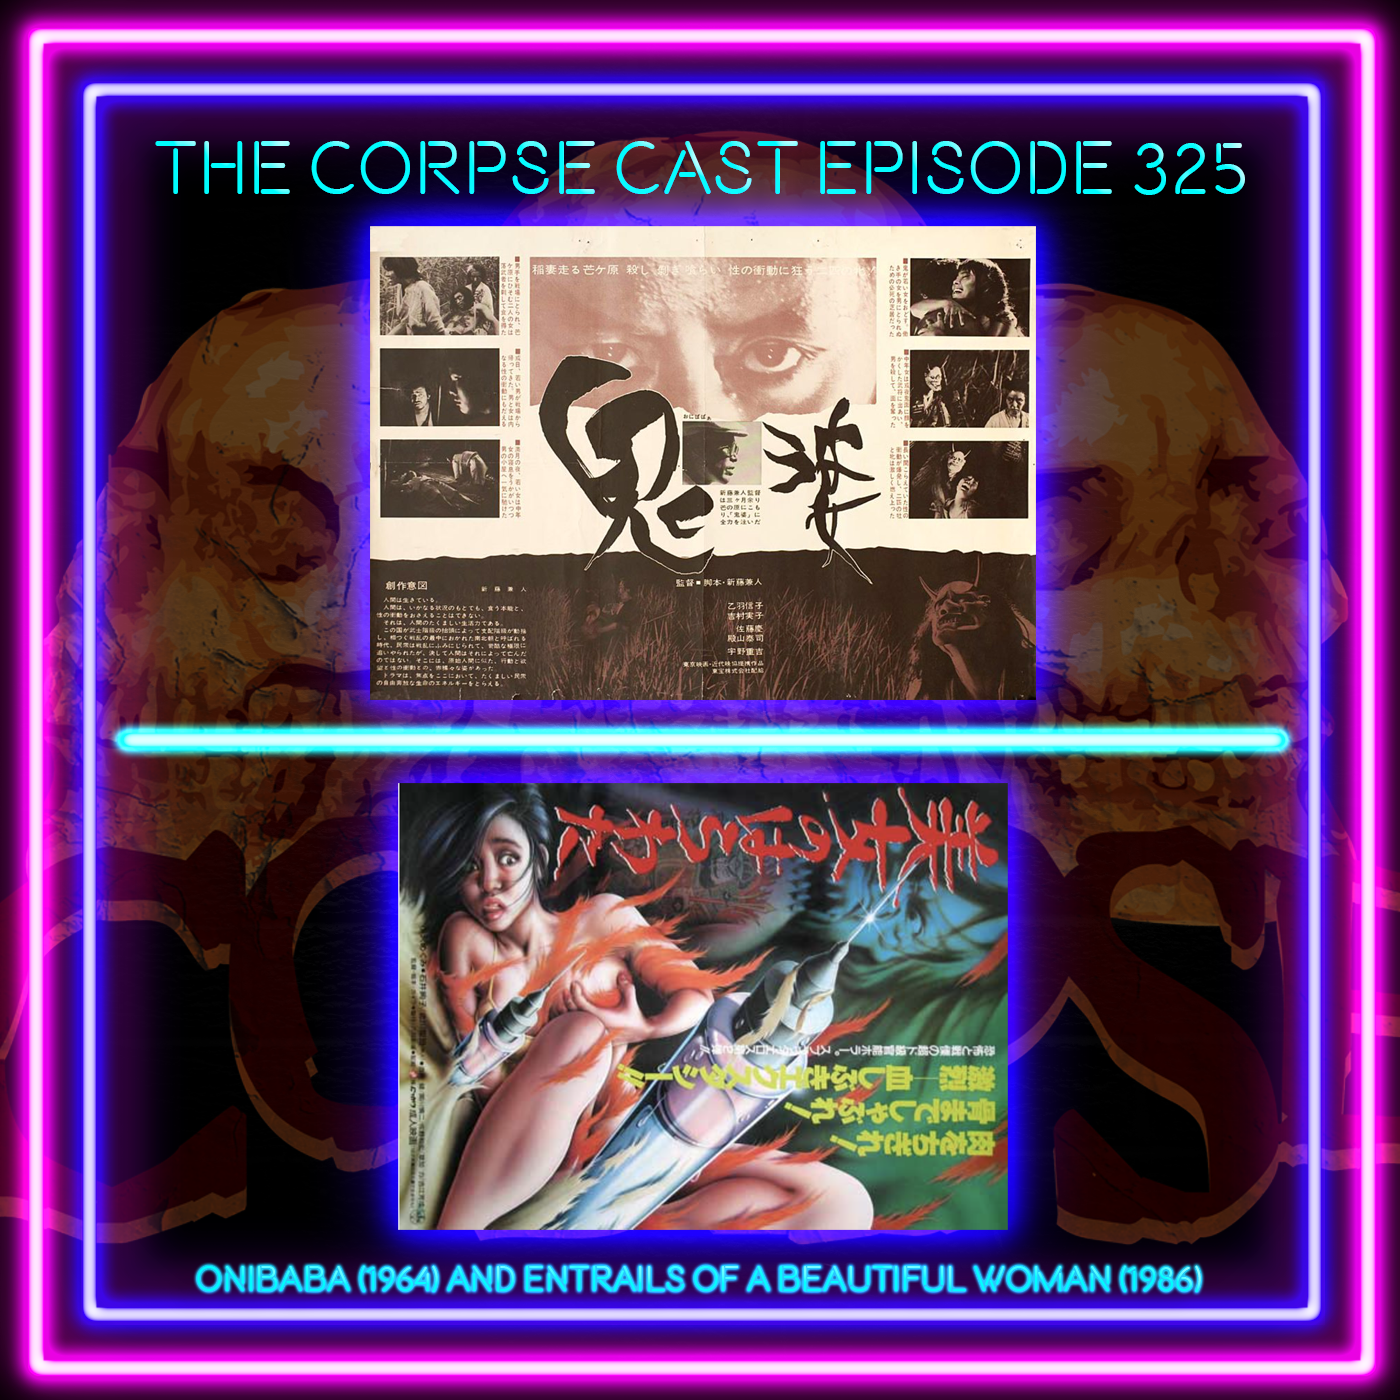 Corpse Cast Episode 325: Onibaba (1964) and Entrails of a Beautiful Woman (1986)